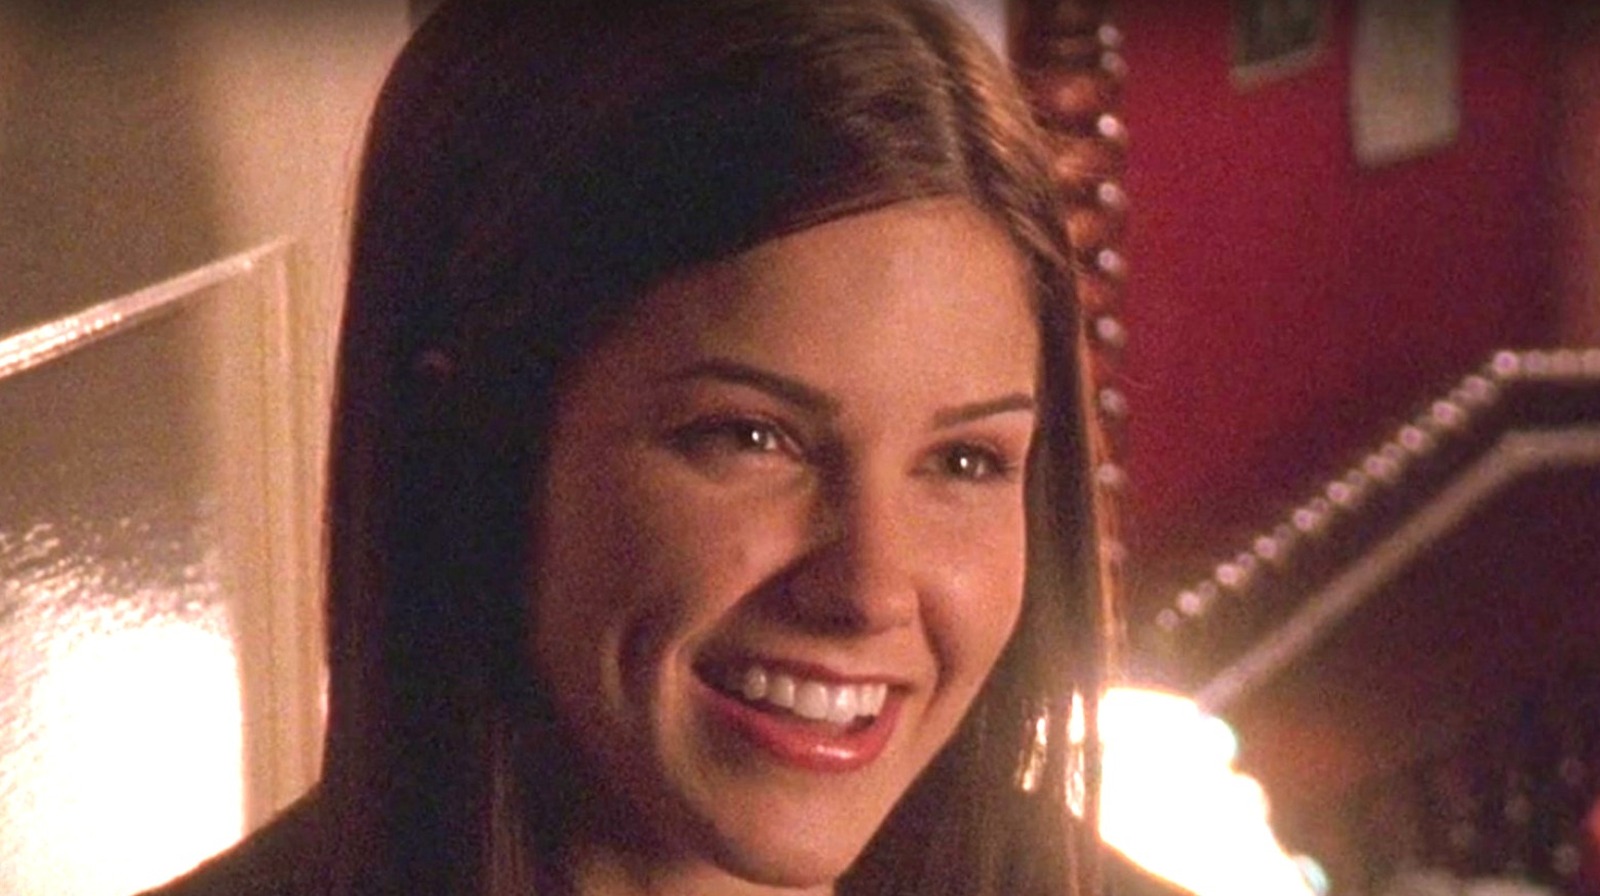 One Tree Hill'—The Teen Drama Now Plagued With Real-Life Drama